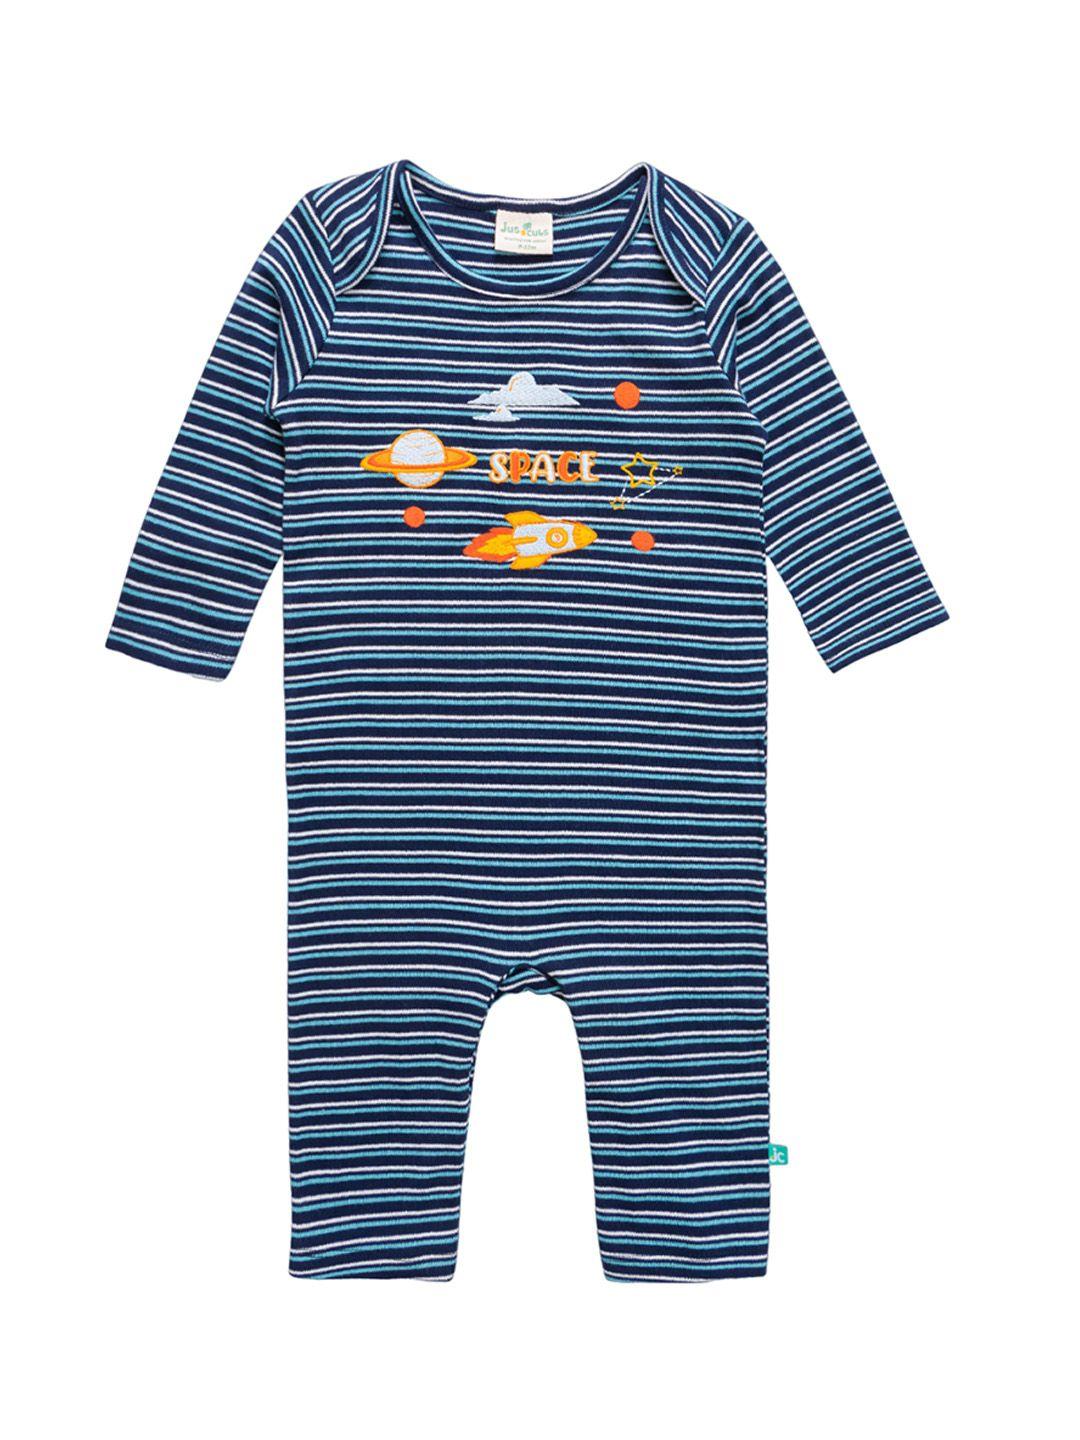 JusCubs Infant Boys Striped Pure Cotton Rompers